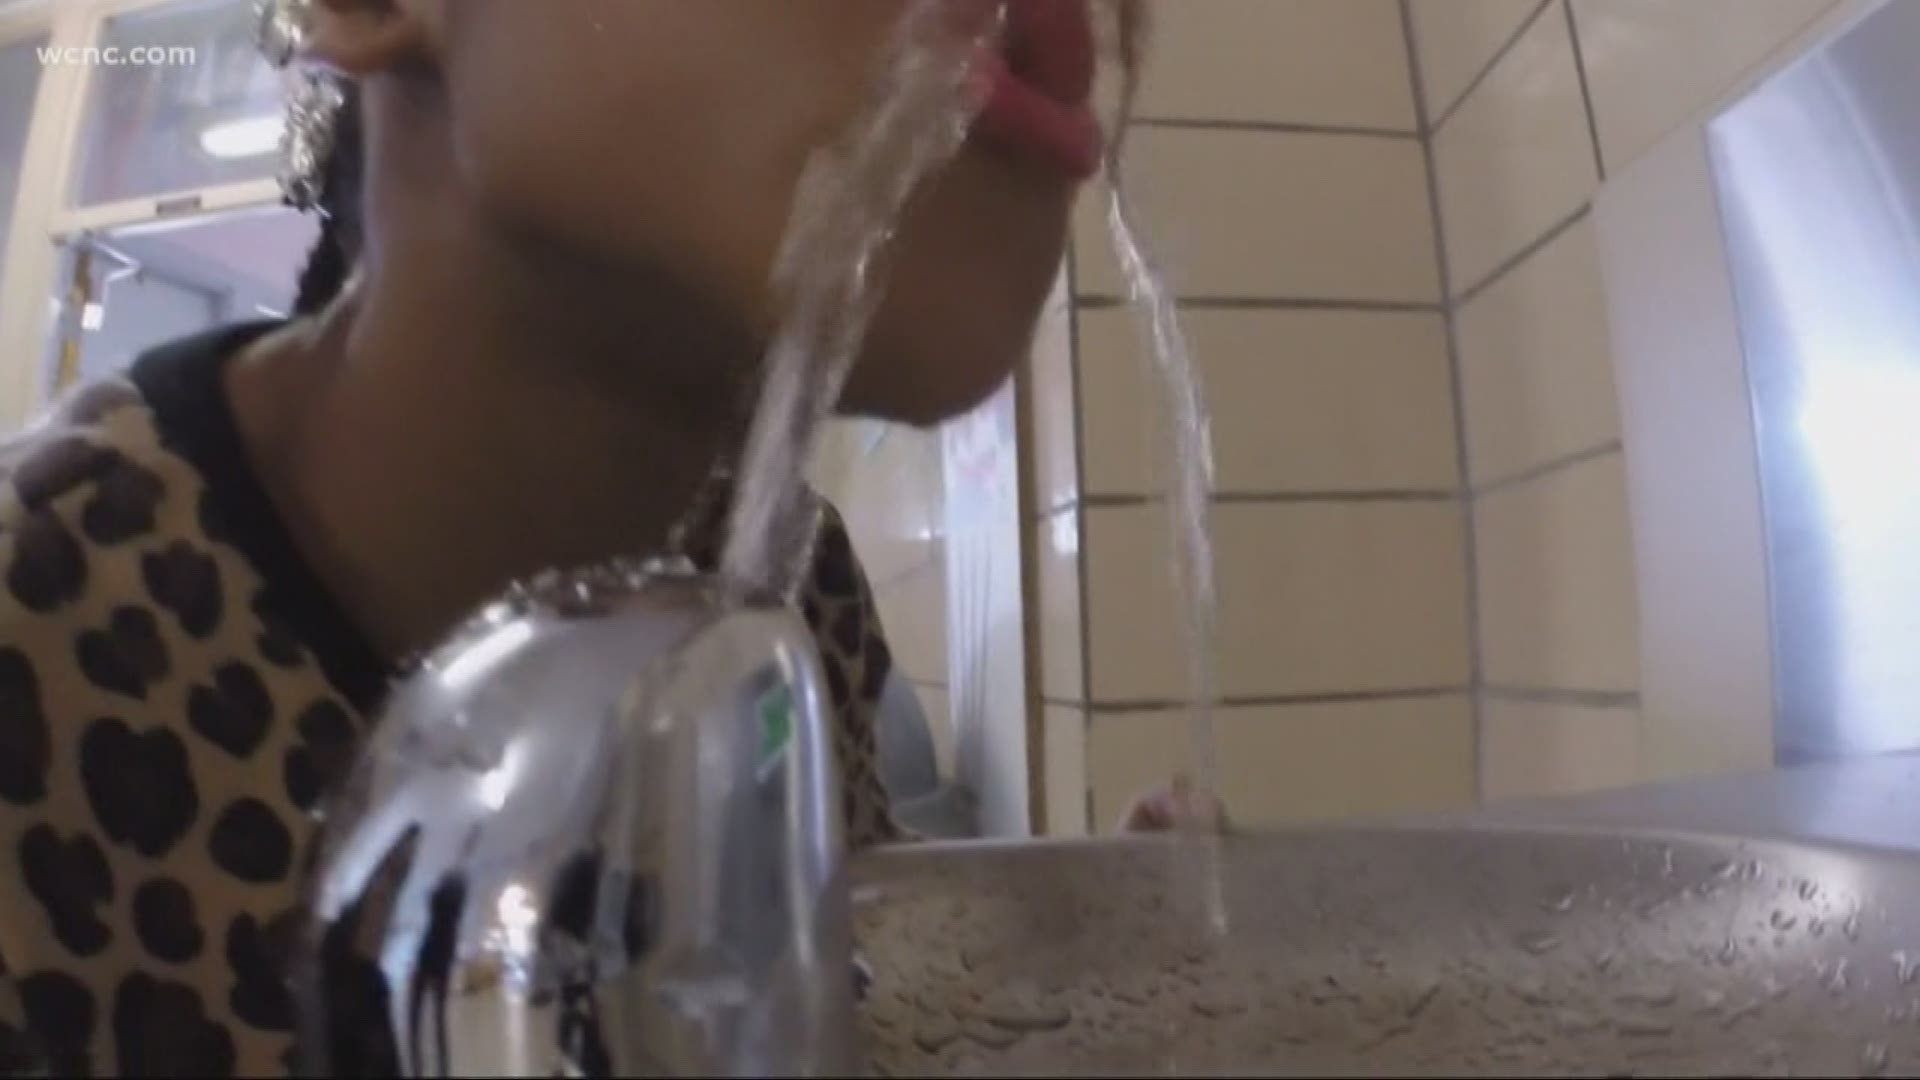 CMS is taking action after an NBC Charlotte investigation uncovered excessive lead levels in several schools.